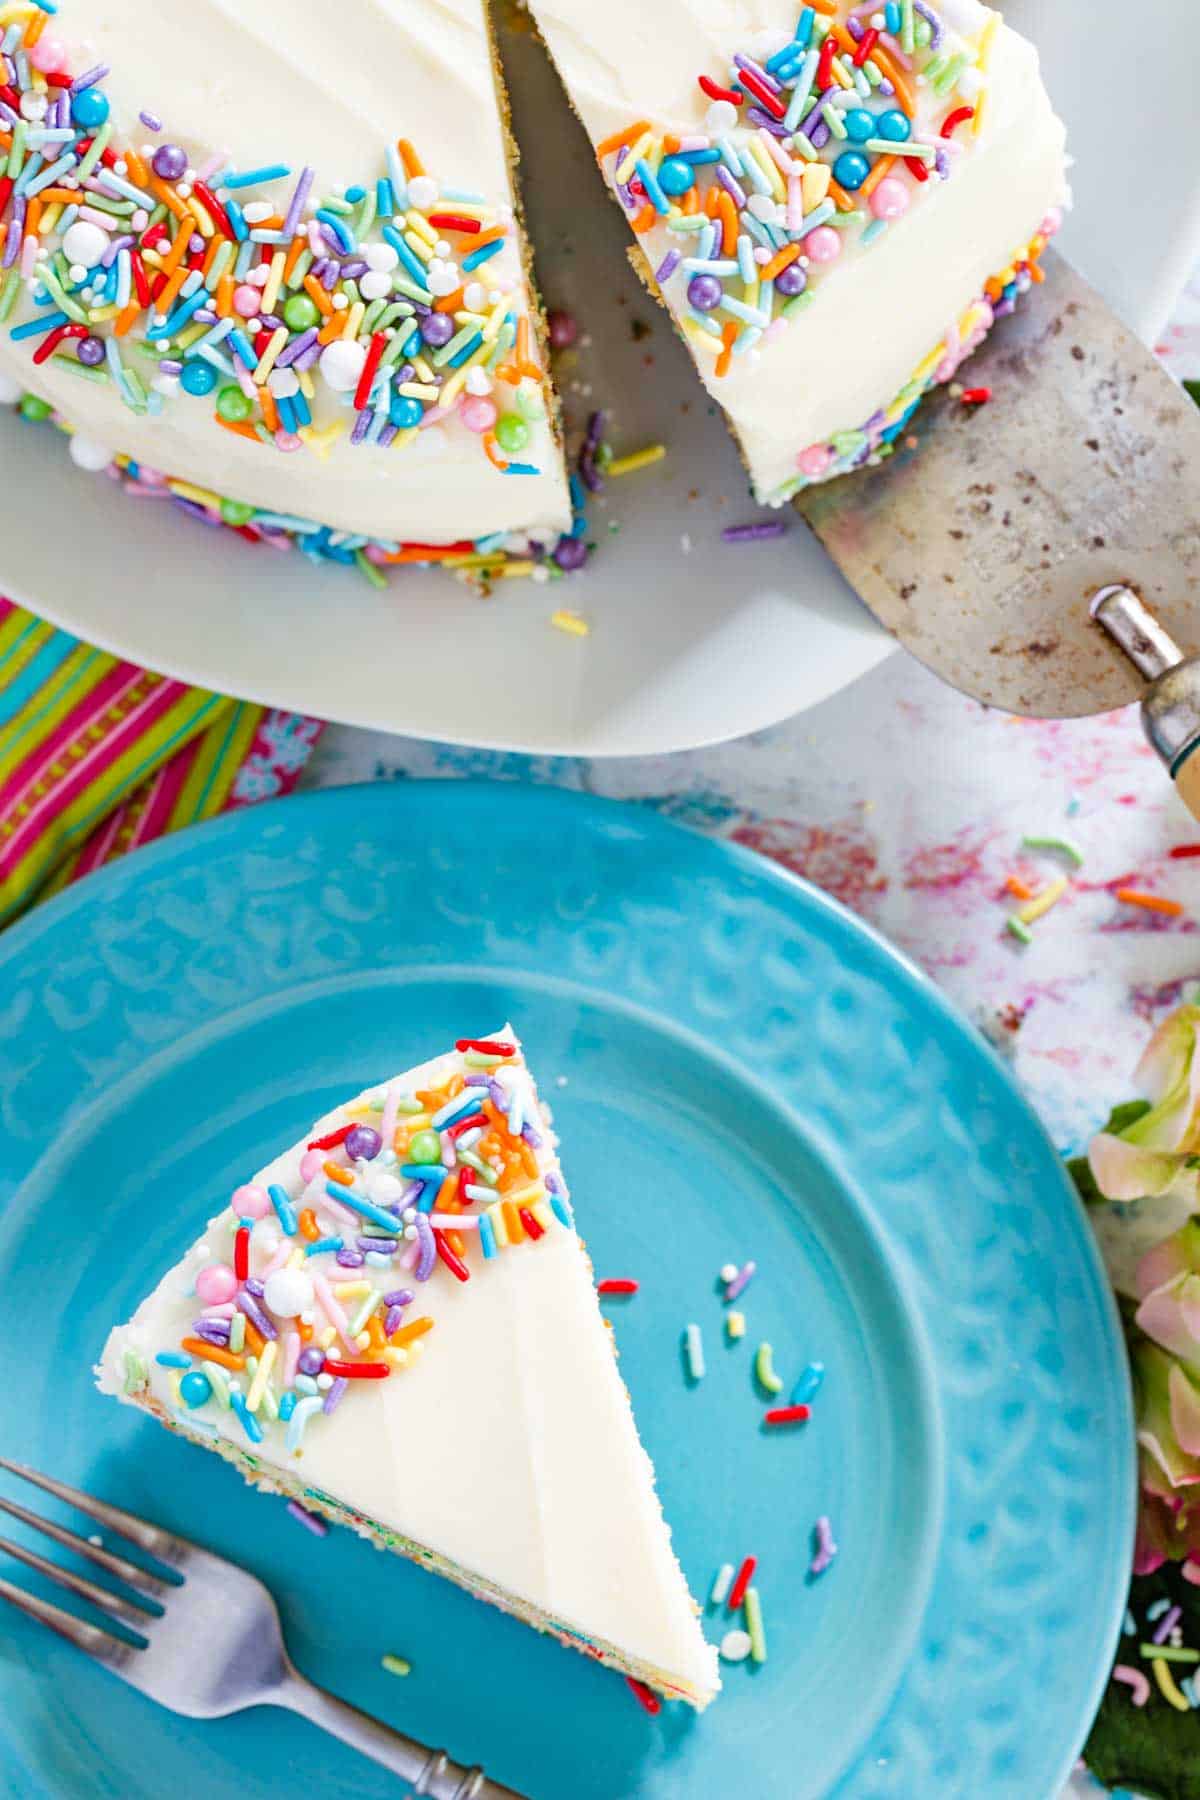 Top view of a slice of gluten free funfetti cake on a blue plate, next to a whole frosted cake.